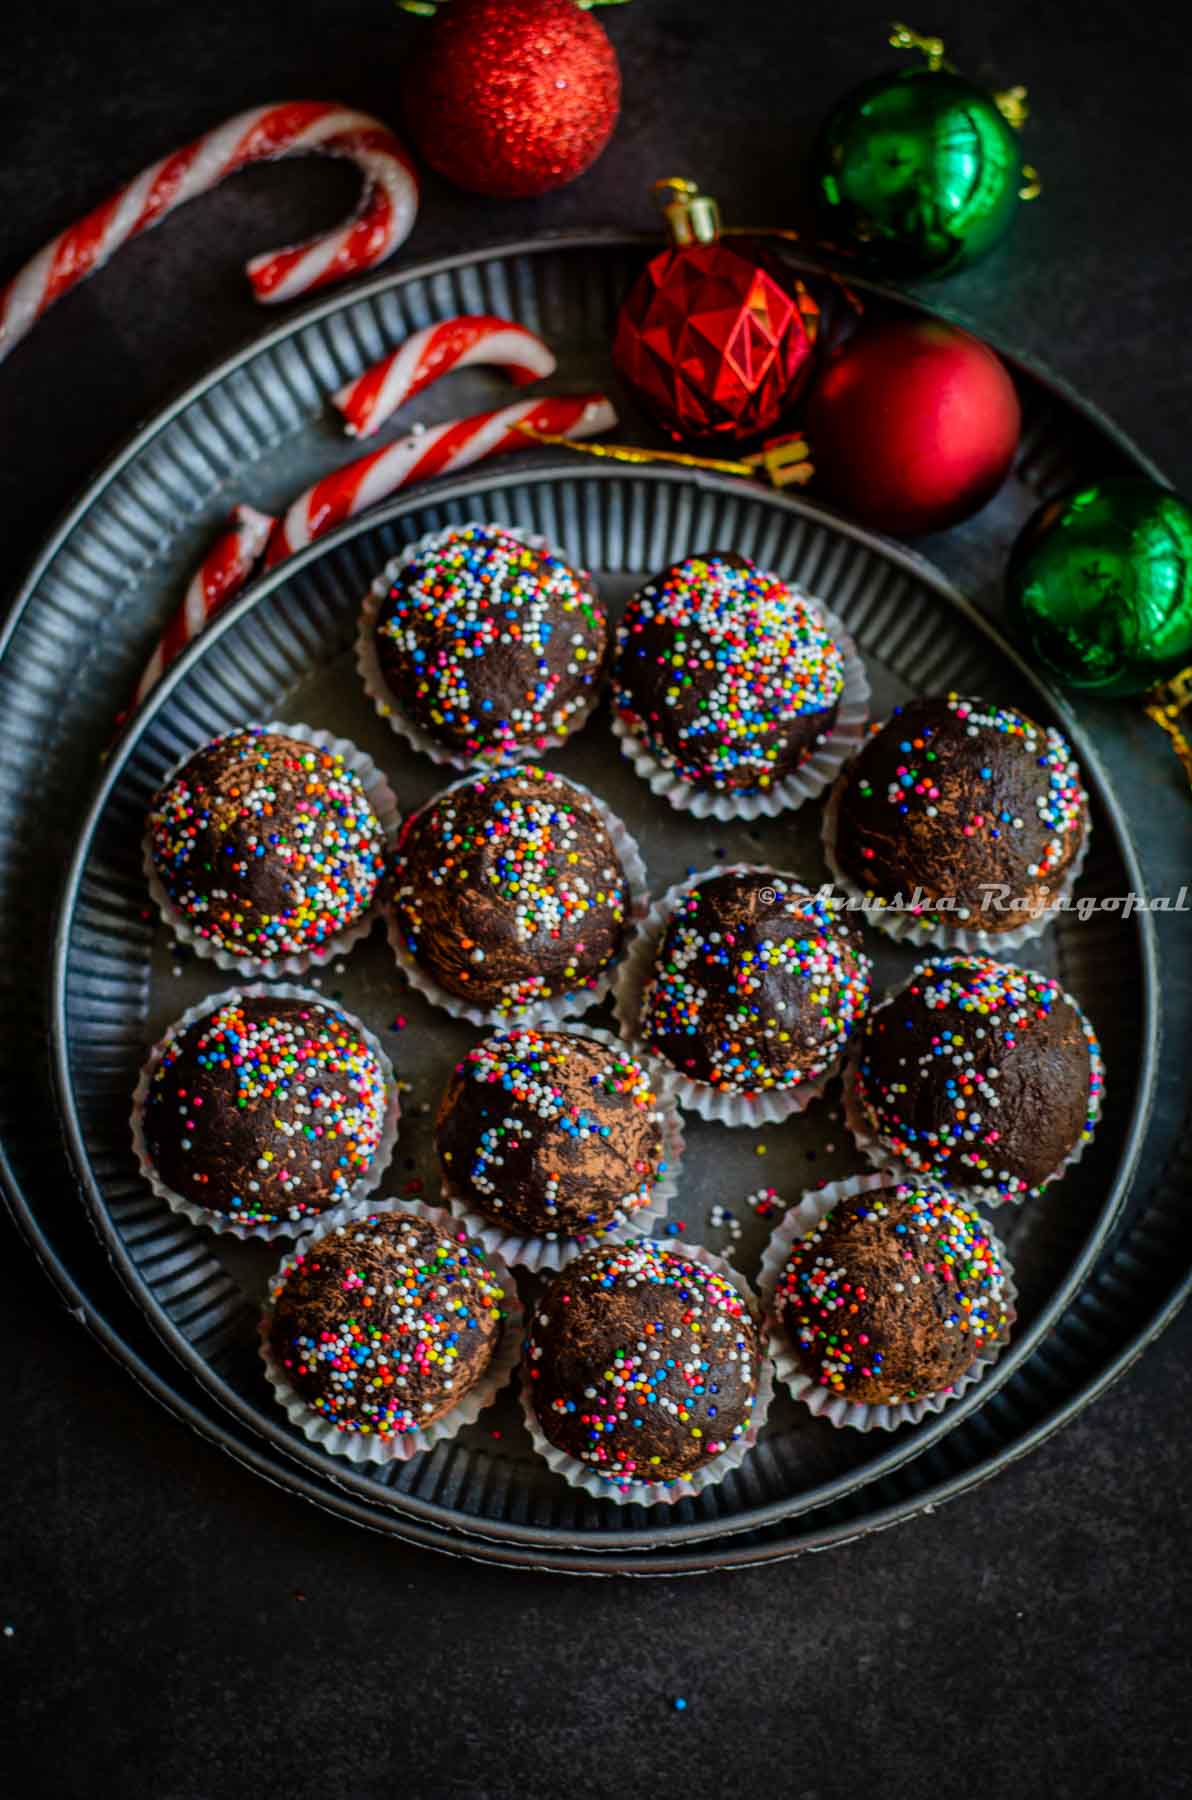 chocolate mint truffles shaped and placed in small muffin cups and arranged on a metal serving tray. Christmas tree decor at the background.